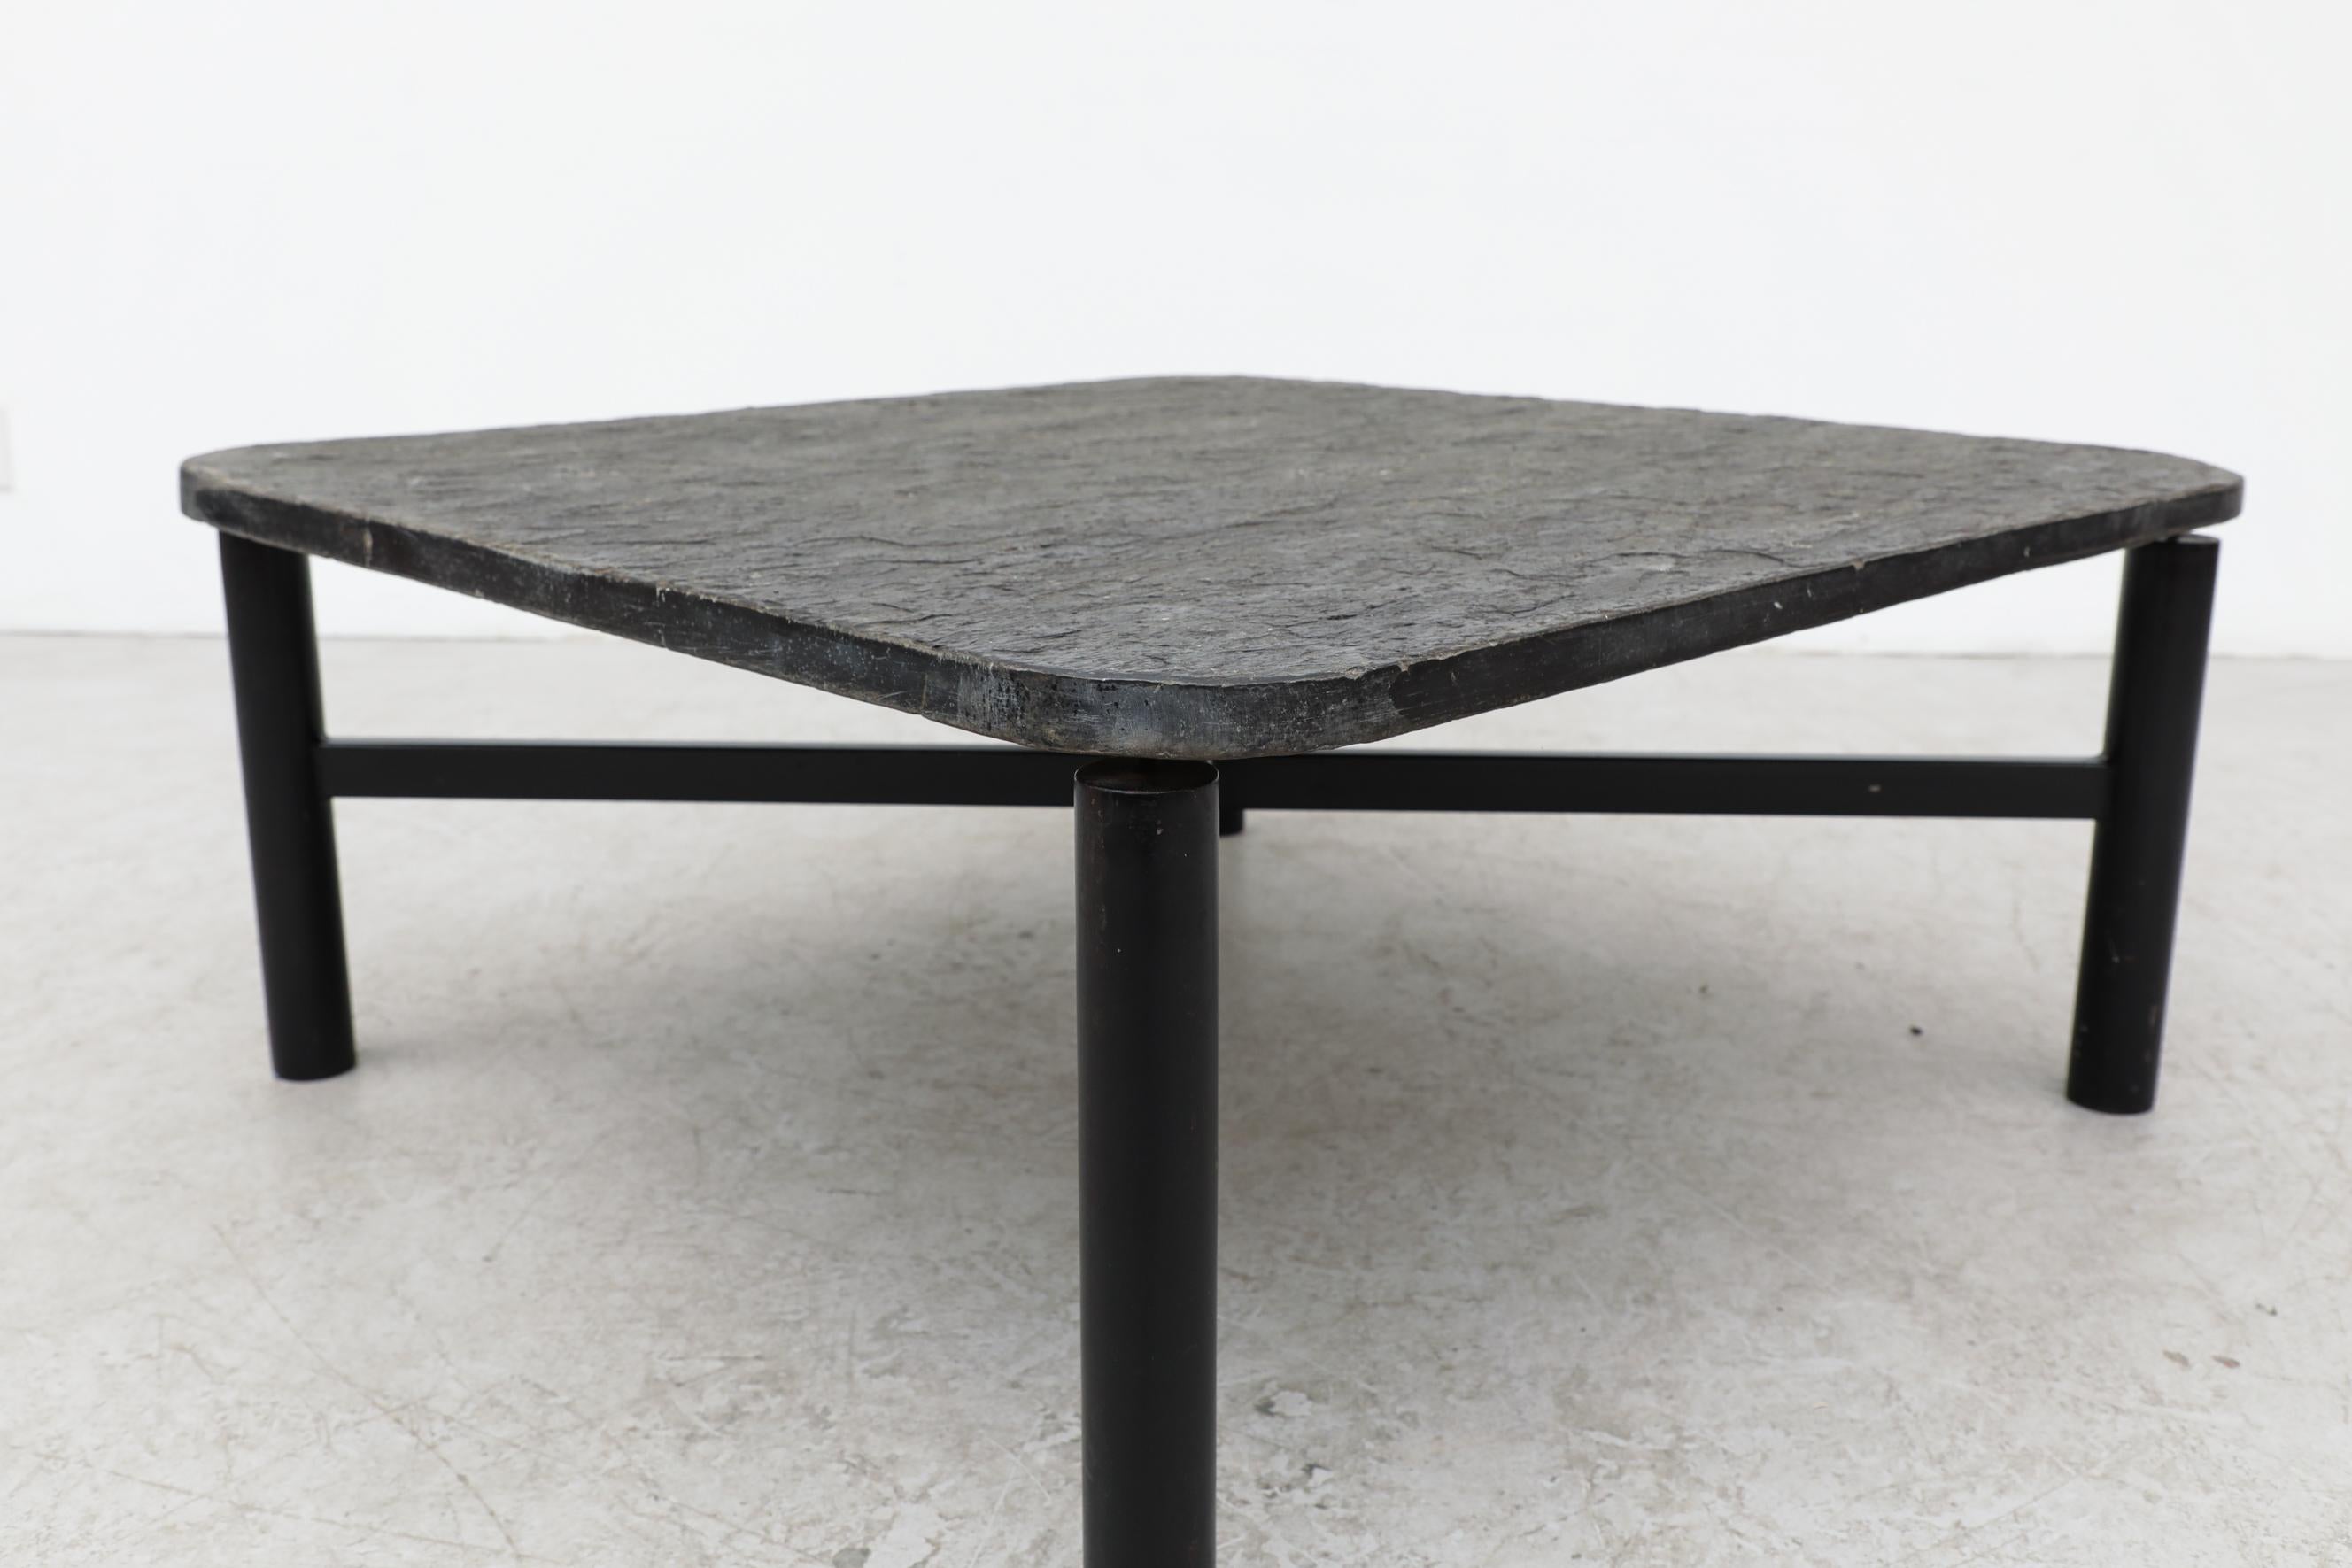 Enameled Modernist Square Stone Coffee Table With Metal X-Base